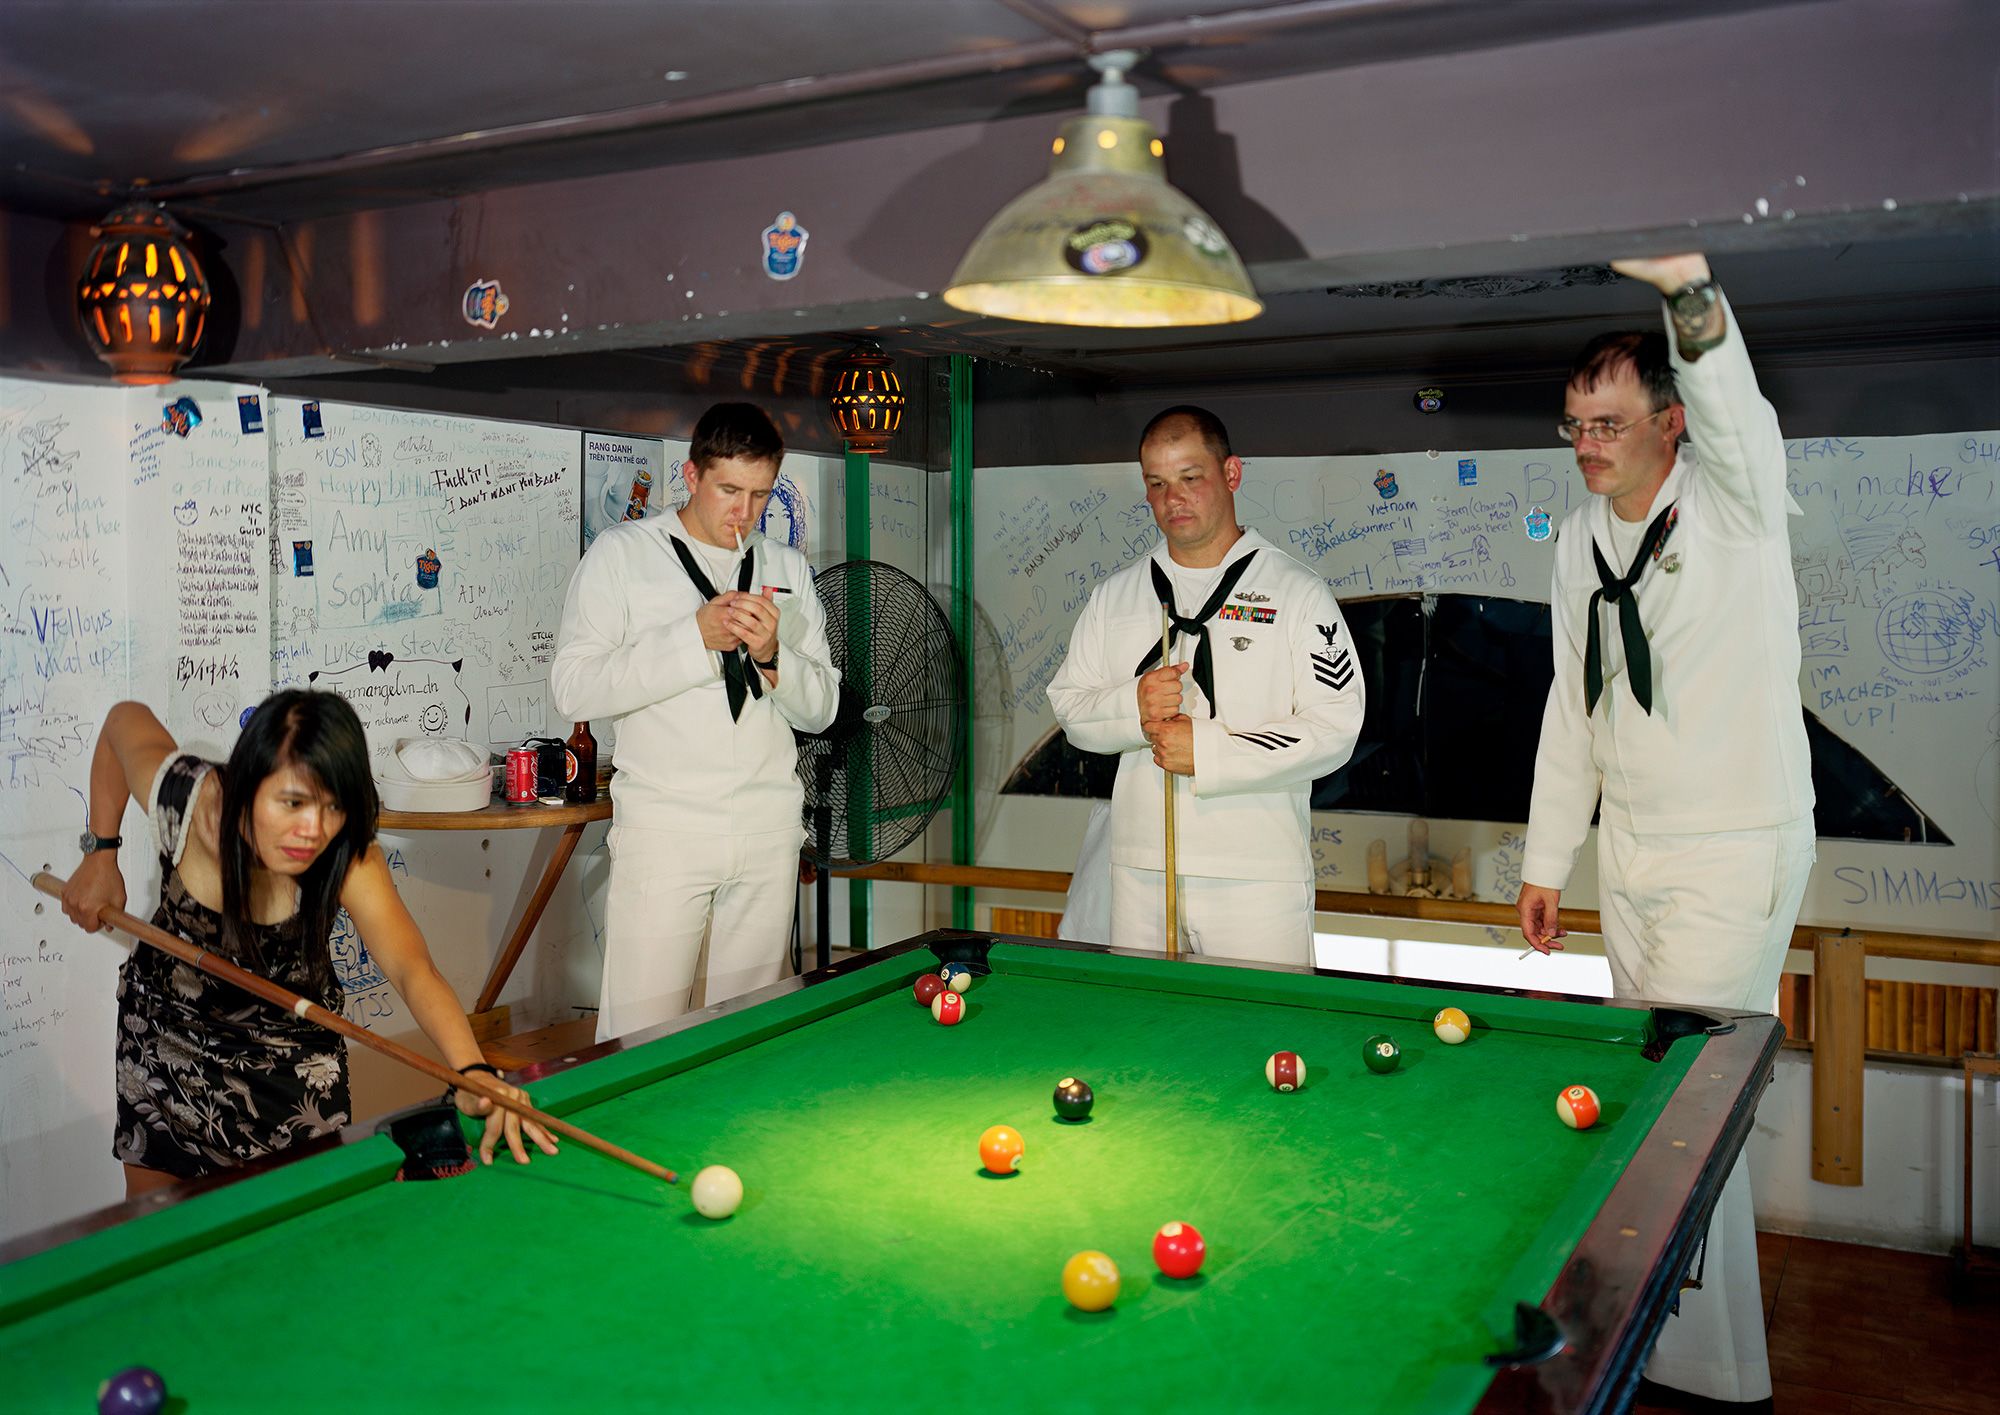 Sailors from the USS Preble play pool with a woman in a bar in Da Nang, Vietnam; a photo from Lê's "Events Ashore" series.